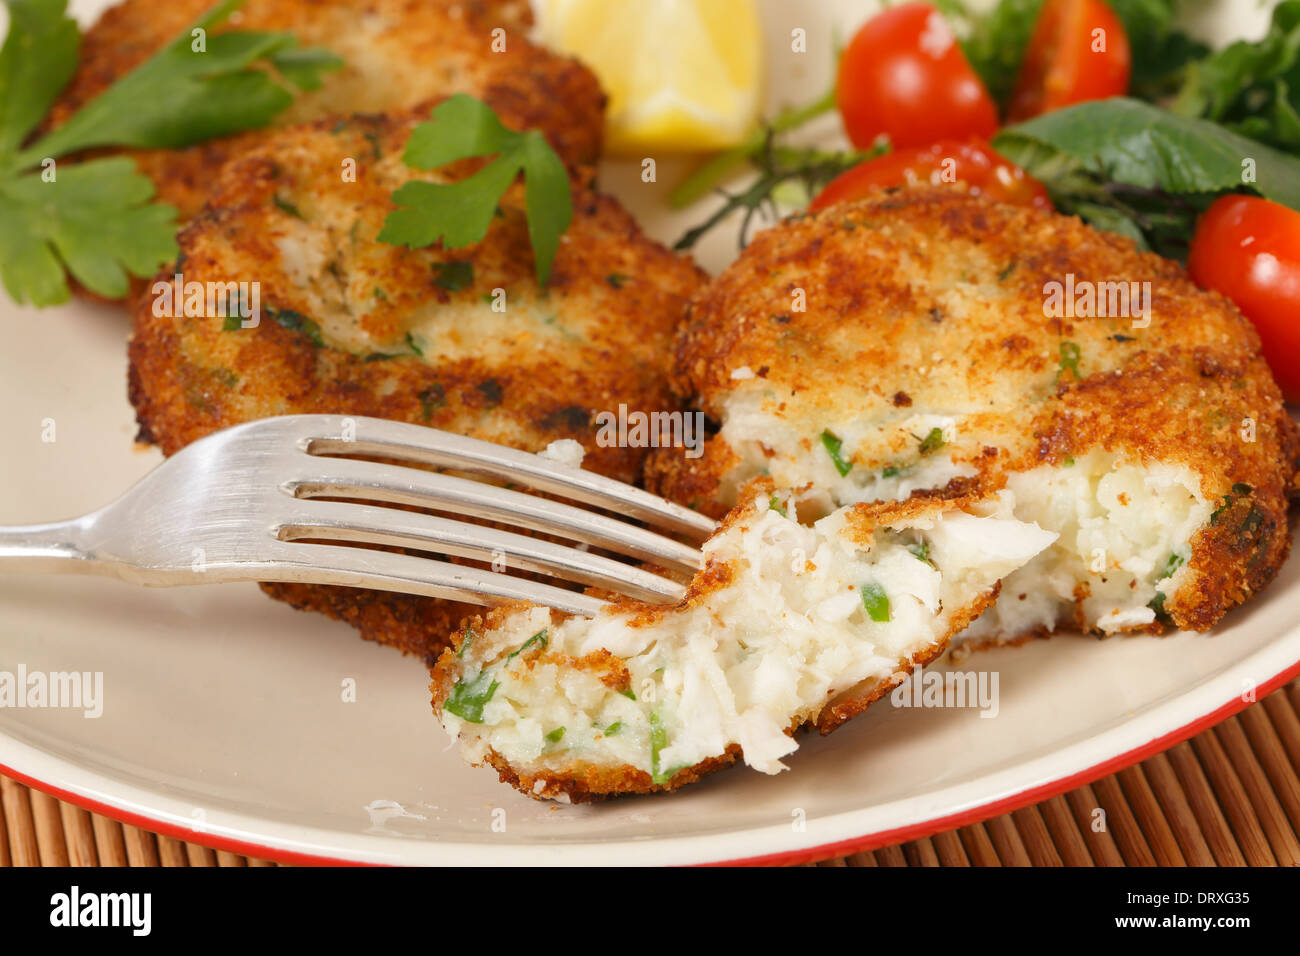 Easy to make fishcakes, with steamed fish crumbled into mashed potato and parsley mix,  served with a salad Stock Photo